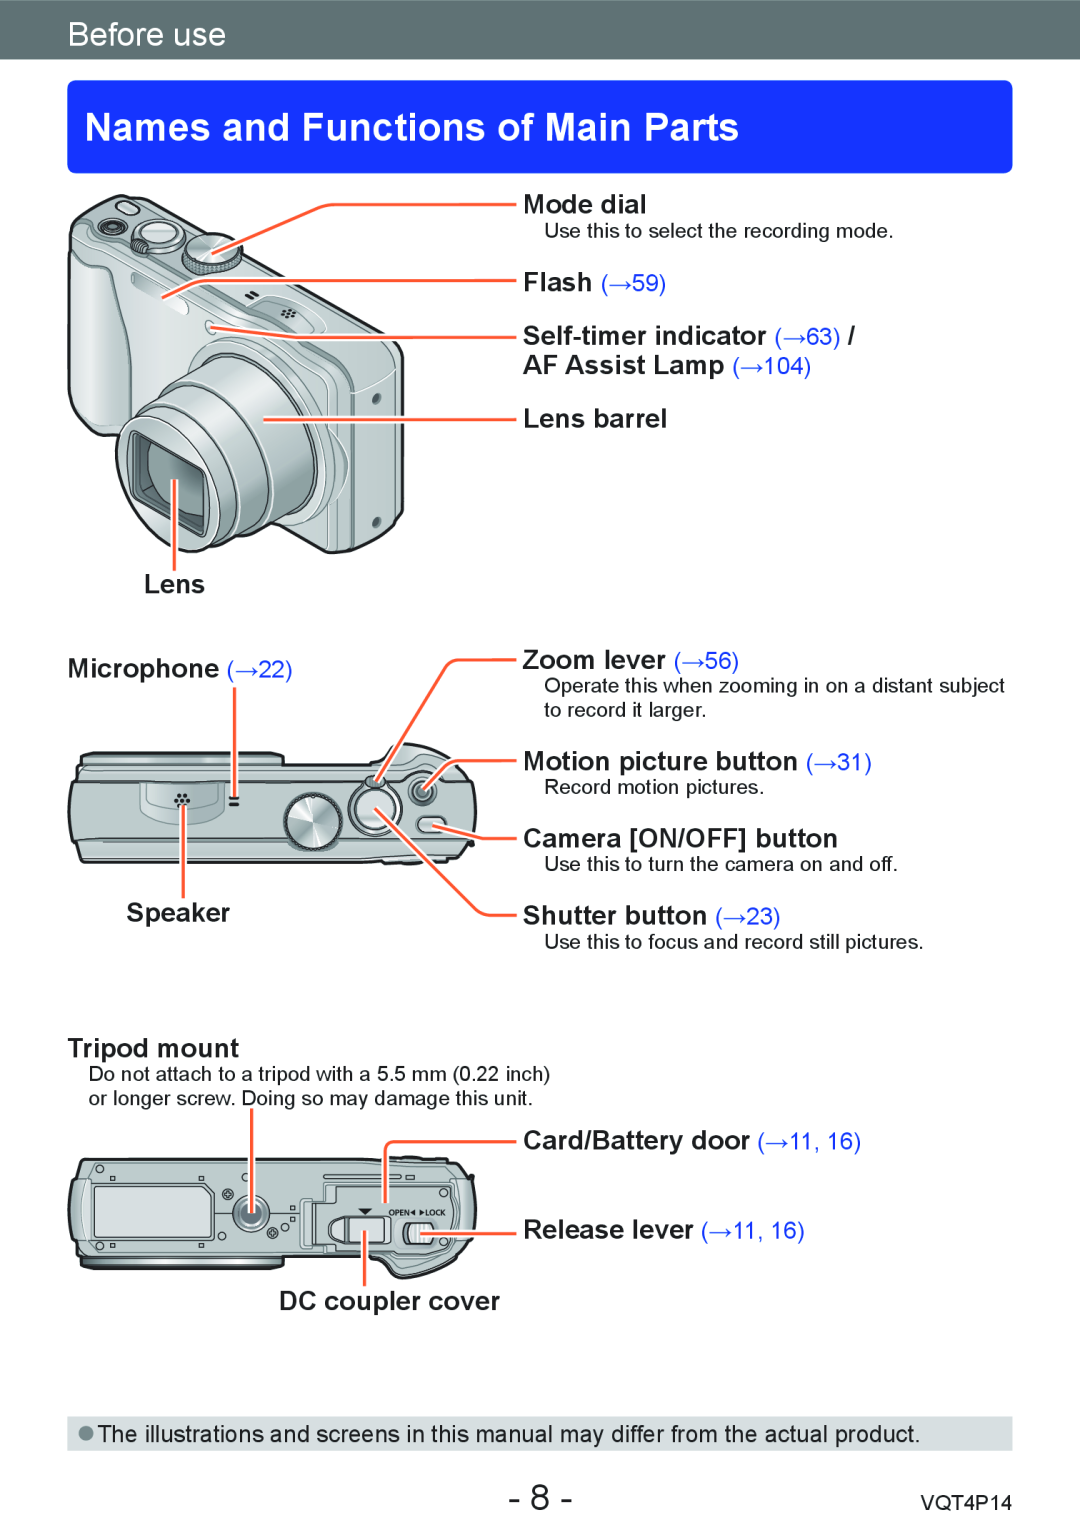 Panasonic DMC-ZS25 Names and Functions of Main Parts, Mode dial, Lens, Microphone →22, Zoom lever →56, Speaker, Before use 